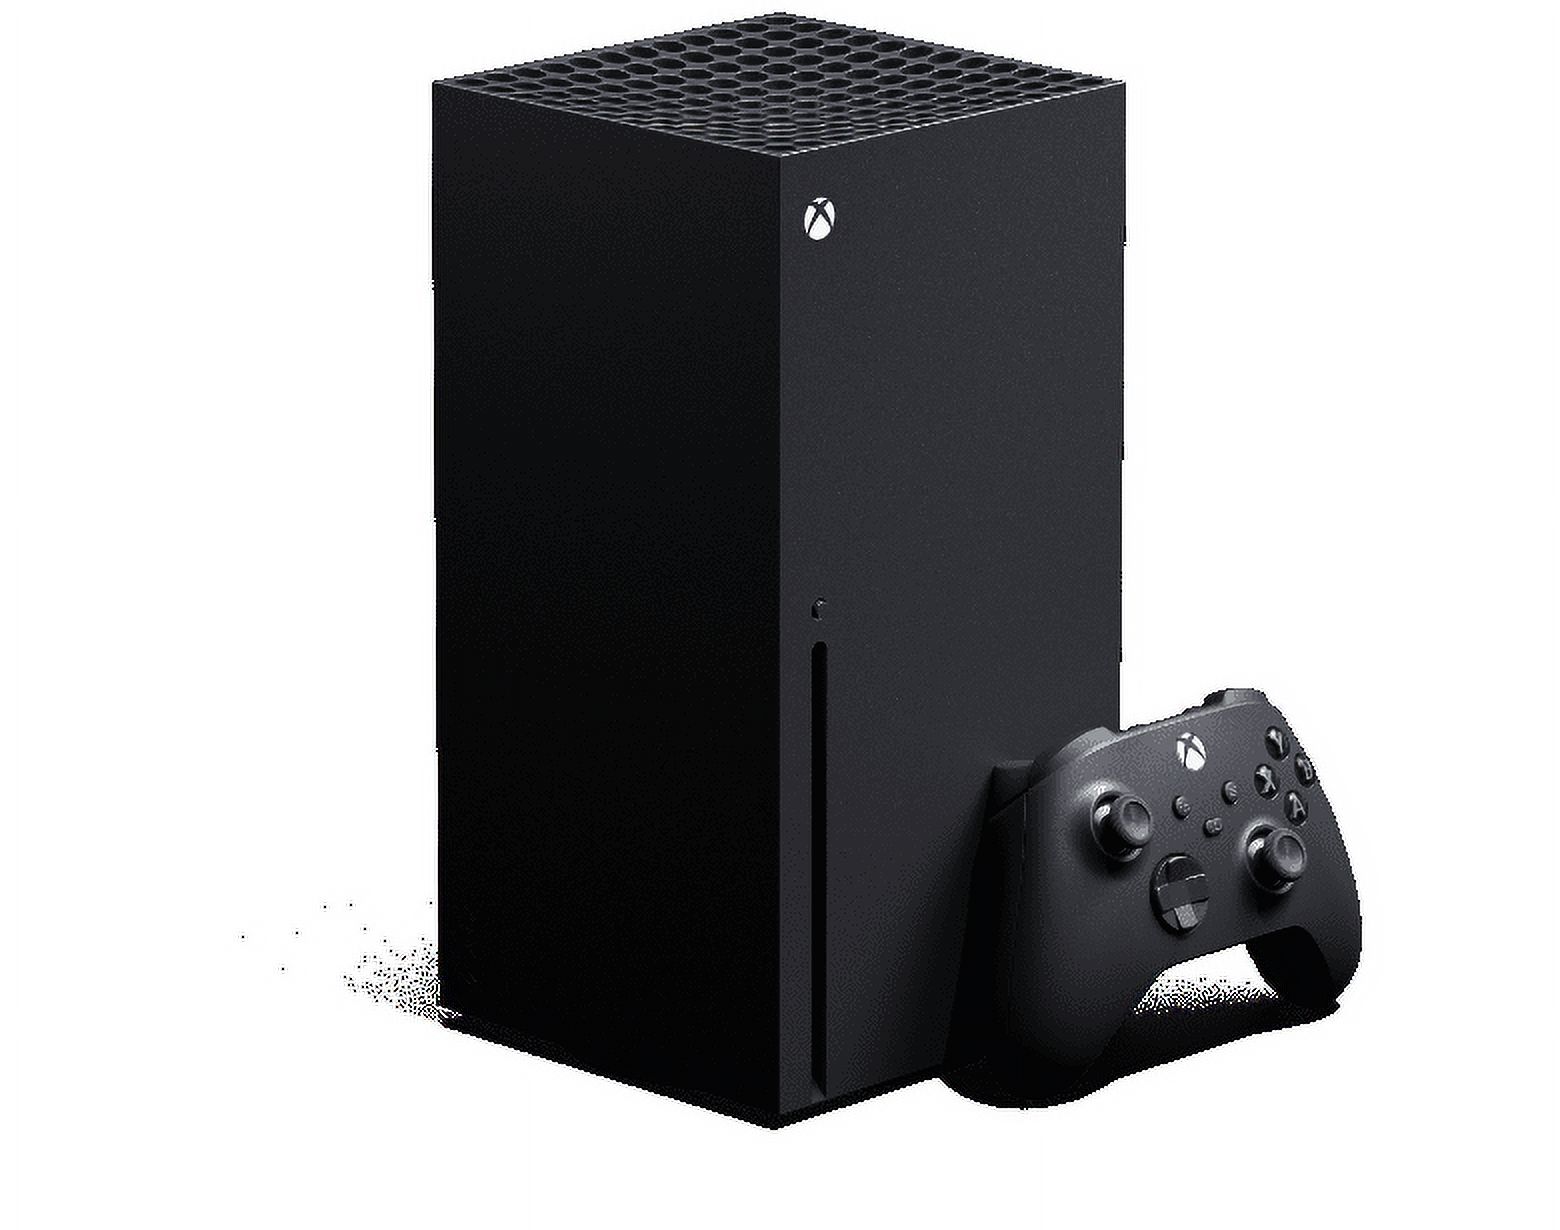 2020 New Xbox Console - 1TB SSD Black X Version with Disc Drive - image 5 of 6